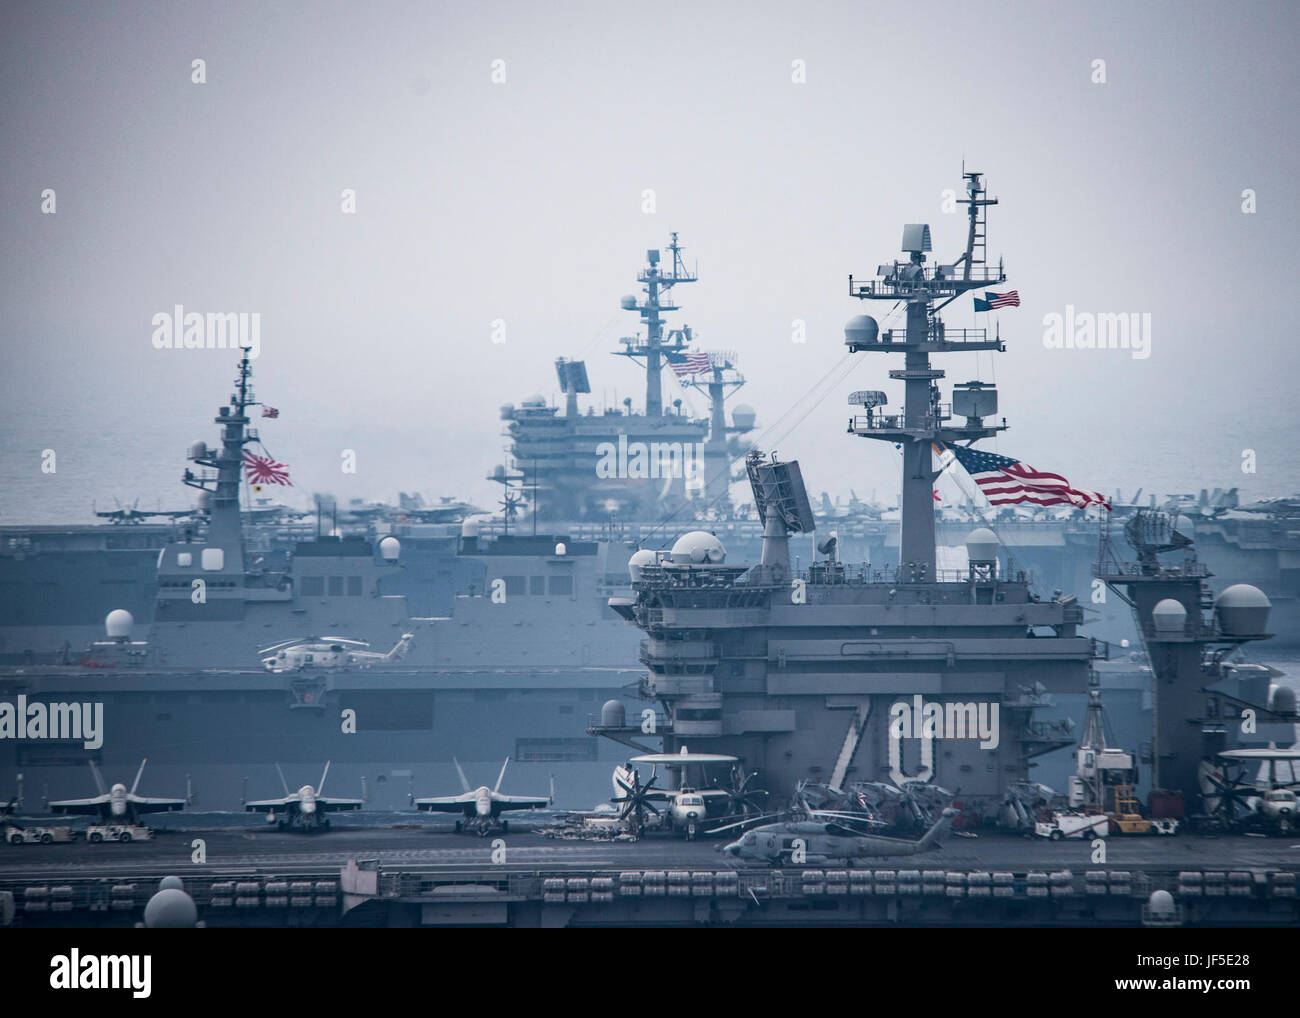 170601-N-GD109-070 SEA OF JAPAN (June 1, 2017) The Carl Vinson strike group, including USS Carl Vinson (CVN 70), Carrier Air Wing (CVW) 2, guided-missile cruiser USS Lake Champlain (CG 57) and guided-missile destroyers USS Wayne E. Meyer (DDG 108) and USS Michael Murphy (DDG 112), operates with the Ronald Reagan strike group including, USS Ronald Reagan (CVN 76), Carrier Air Wing (CVW) 5, guided-missile cruiser USS Shiloh (CG 67), guided-missile destroyers USS Barry (DDG 52), USS McCampbell (DDG 85), USS Fitzgerald (DDG 62), and USS Mustin (DDG 89) and the Japanese Ships (JS) Hyuga (DDH 181) a Stock Photo